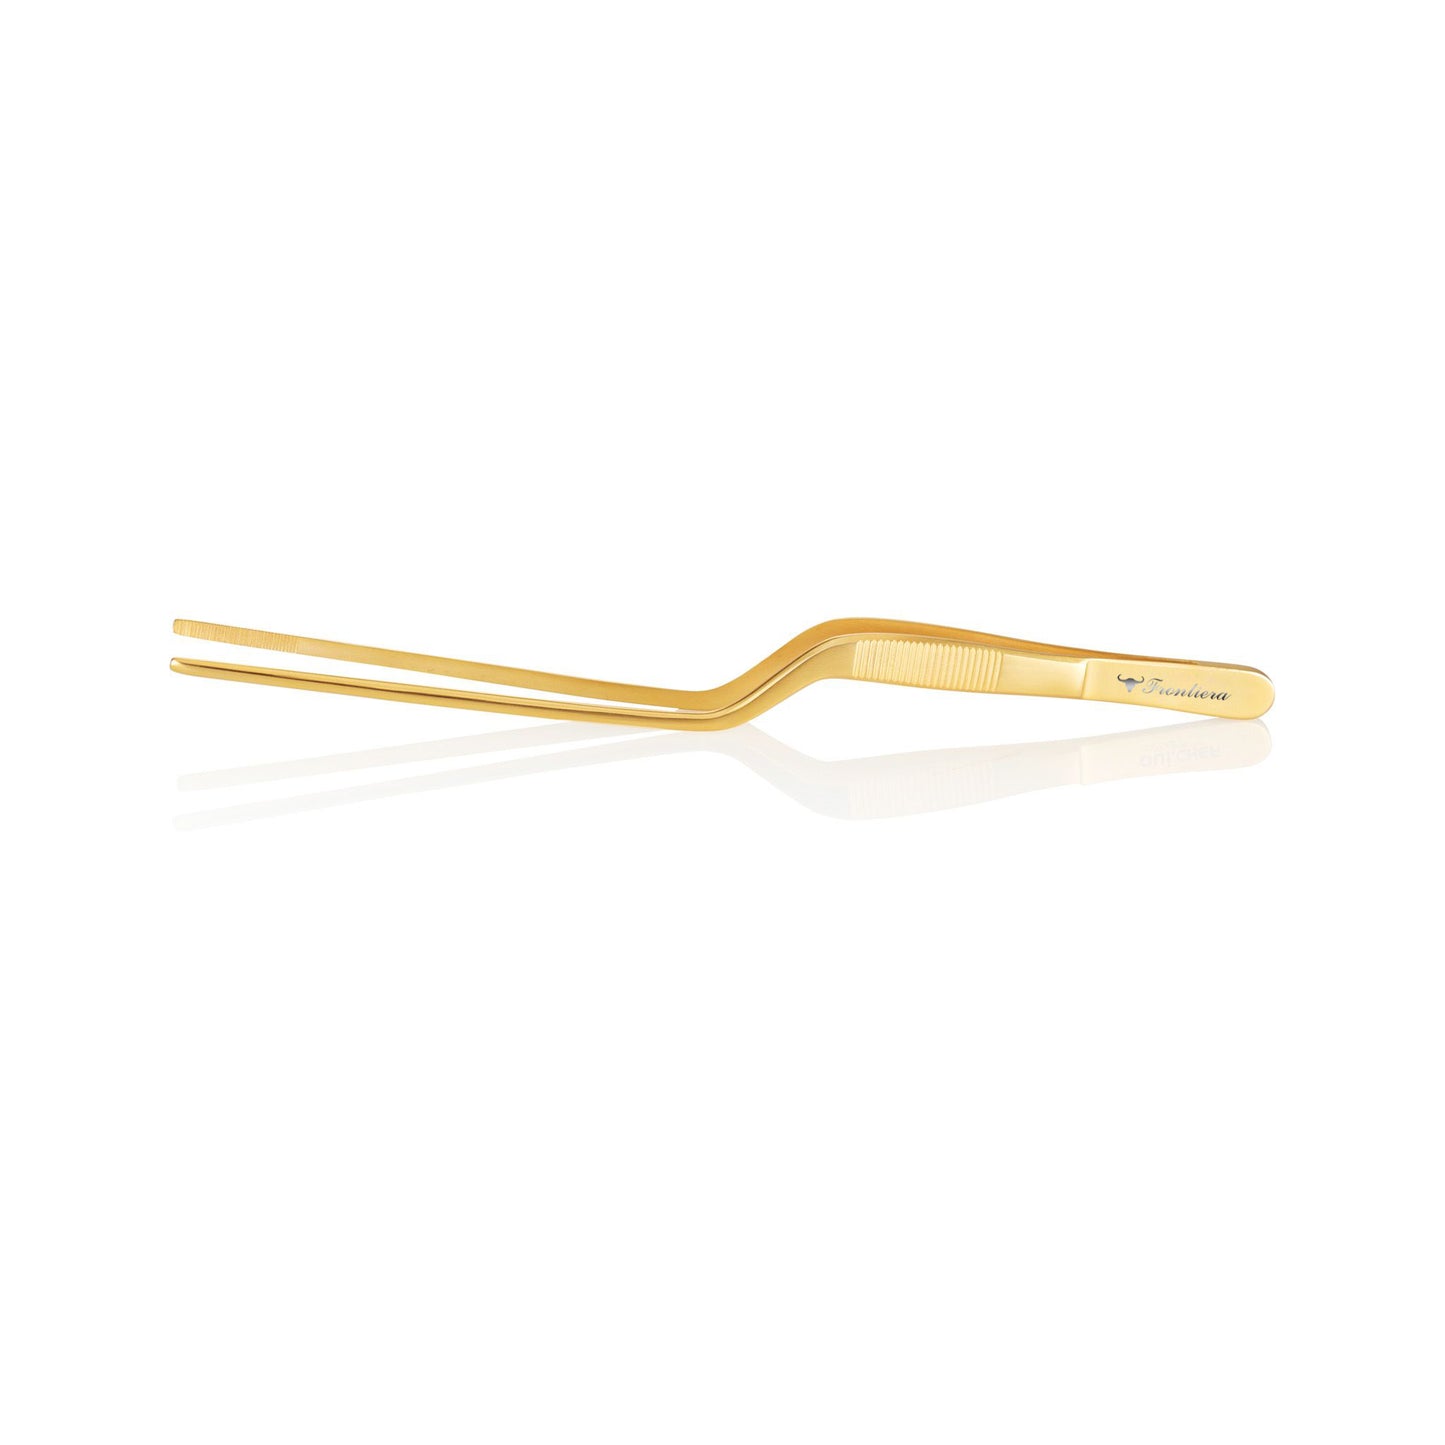 High Precision Offset Chef's Tweezers (20cm/7.87") Gold + Custome Engraving (Optional) [𝗦𝗢𝗟𝗗 𝗢𝗨𝗧]